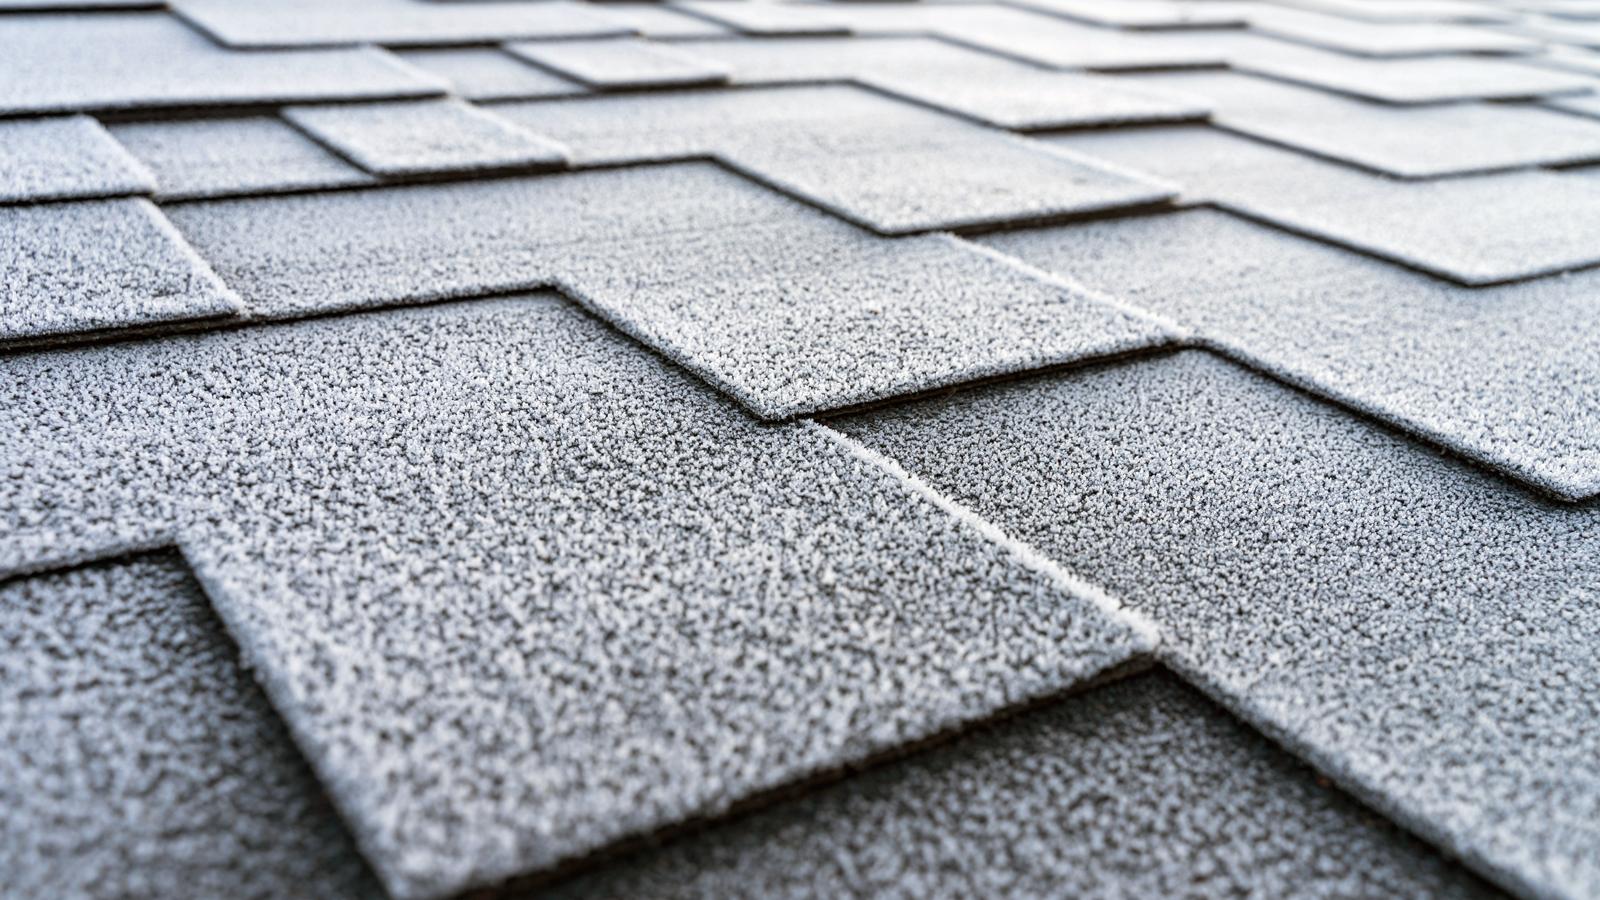 Typical Life of Asphalt Shingle Roof: Durability and Replacement